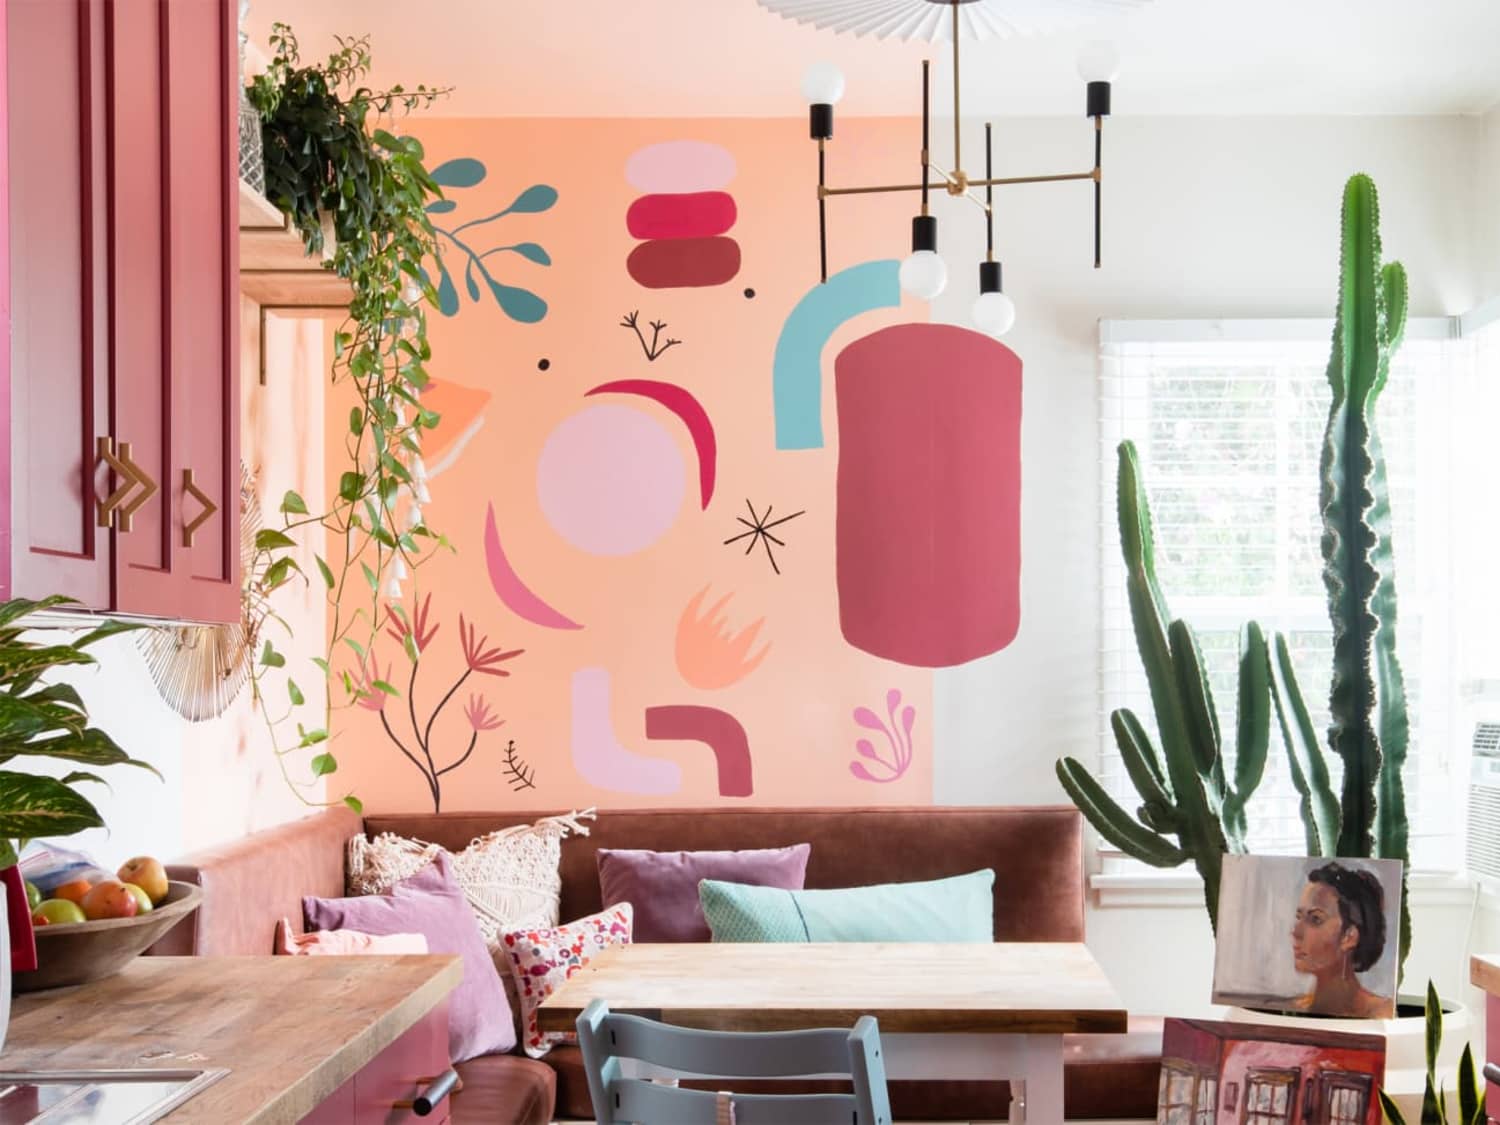 8 Paint Colors That Will Never Go Out of Style  Home decor, Room wall  colors, Pink painted walls